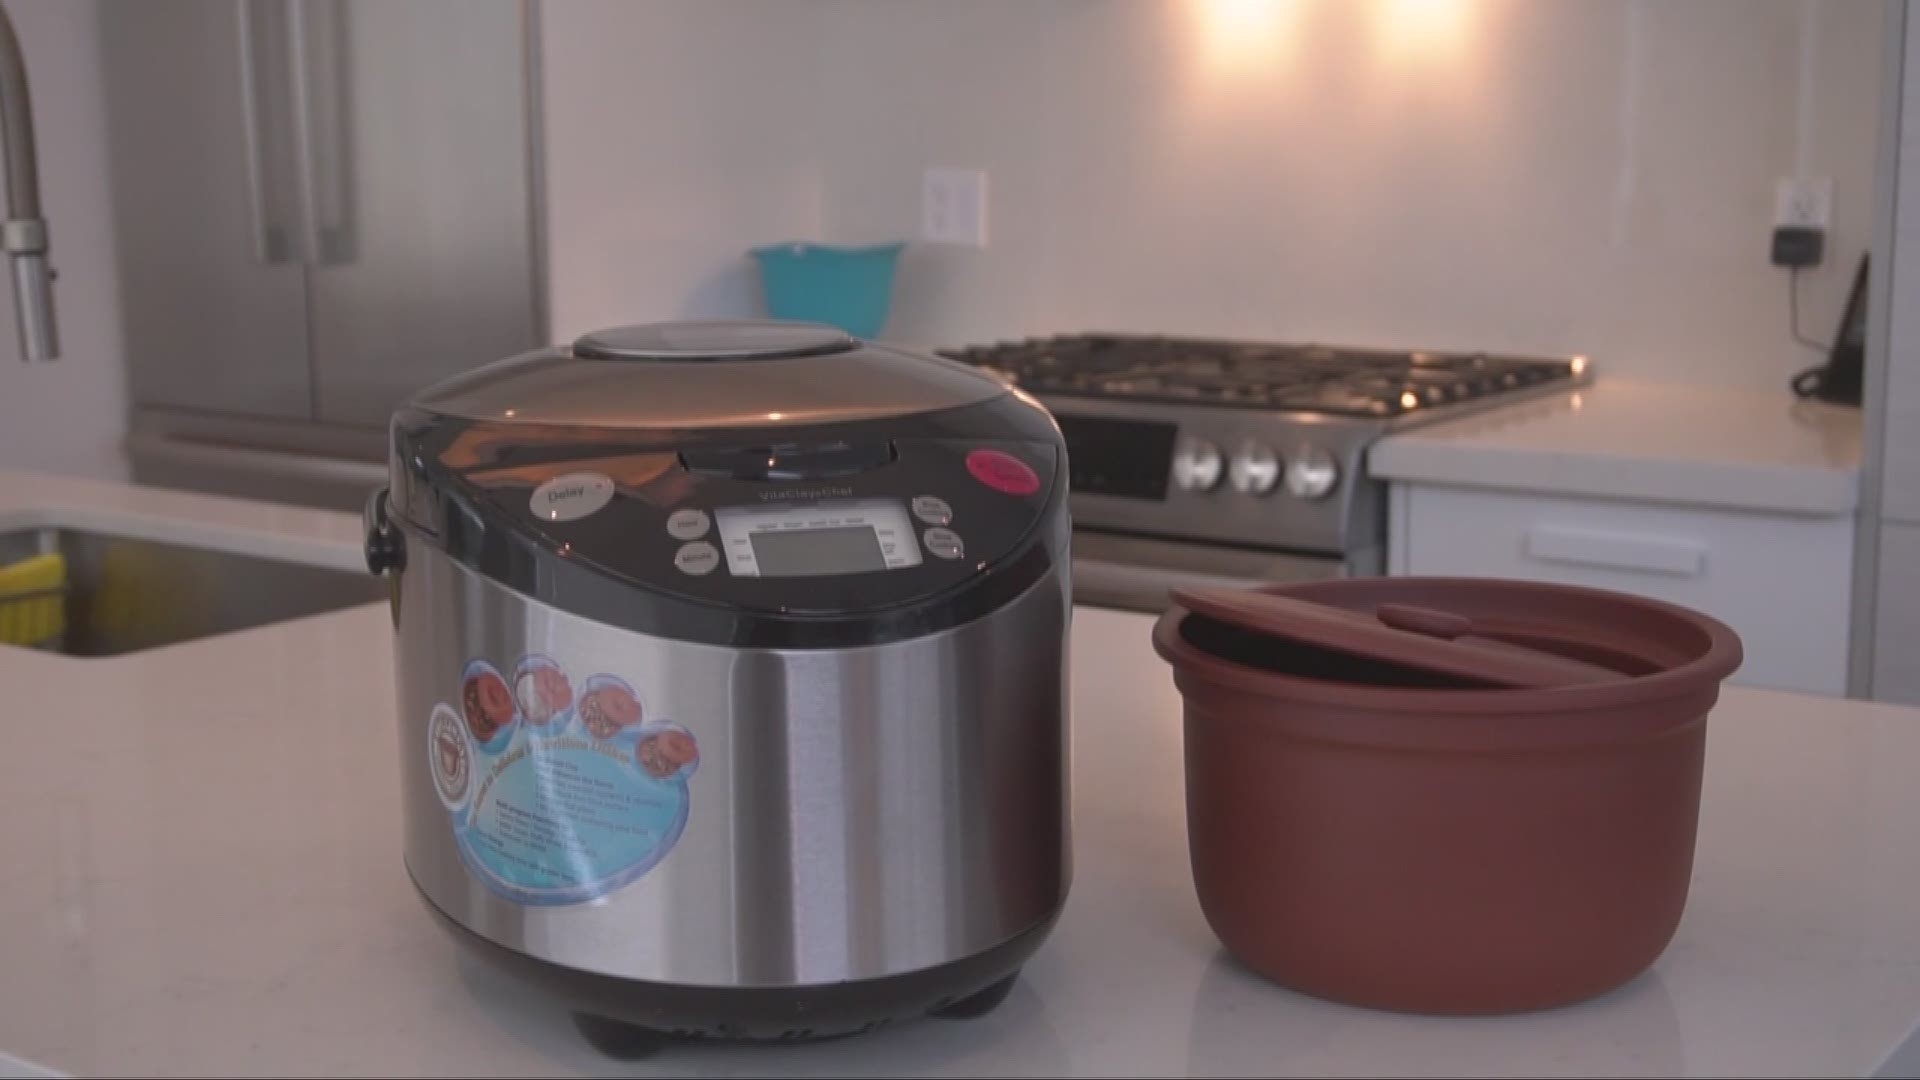 Tech to cut your cooking times in half